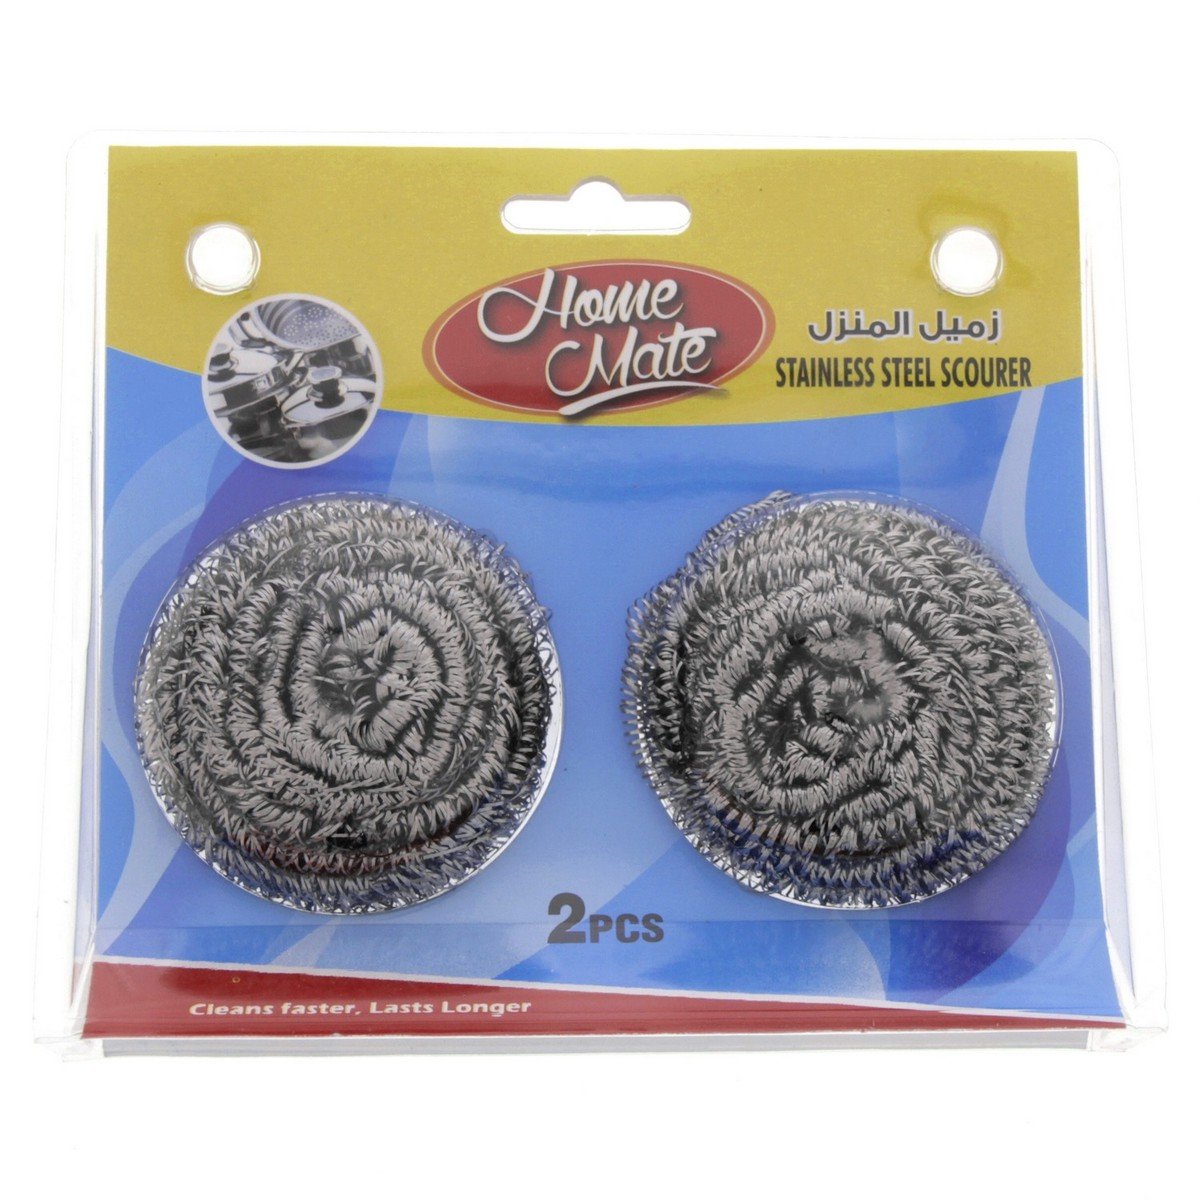 Home Mate Stainless Steel Scourer 2pcs